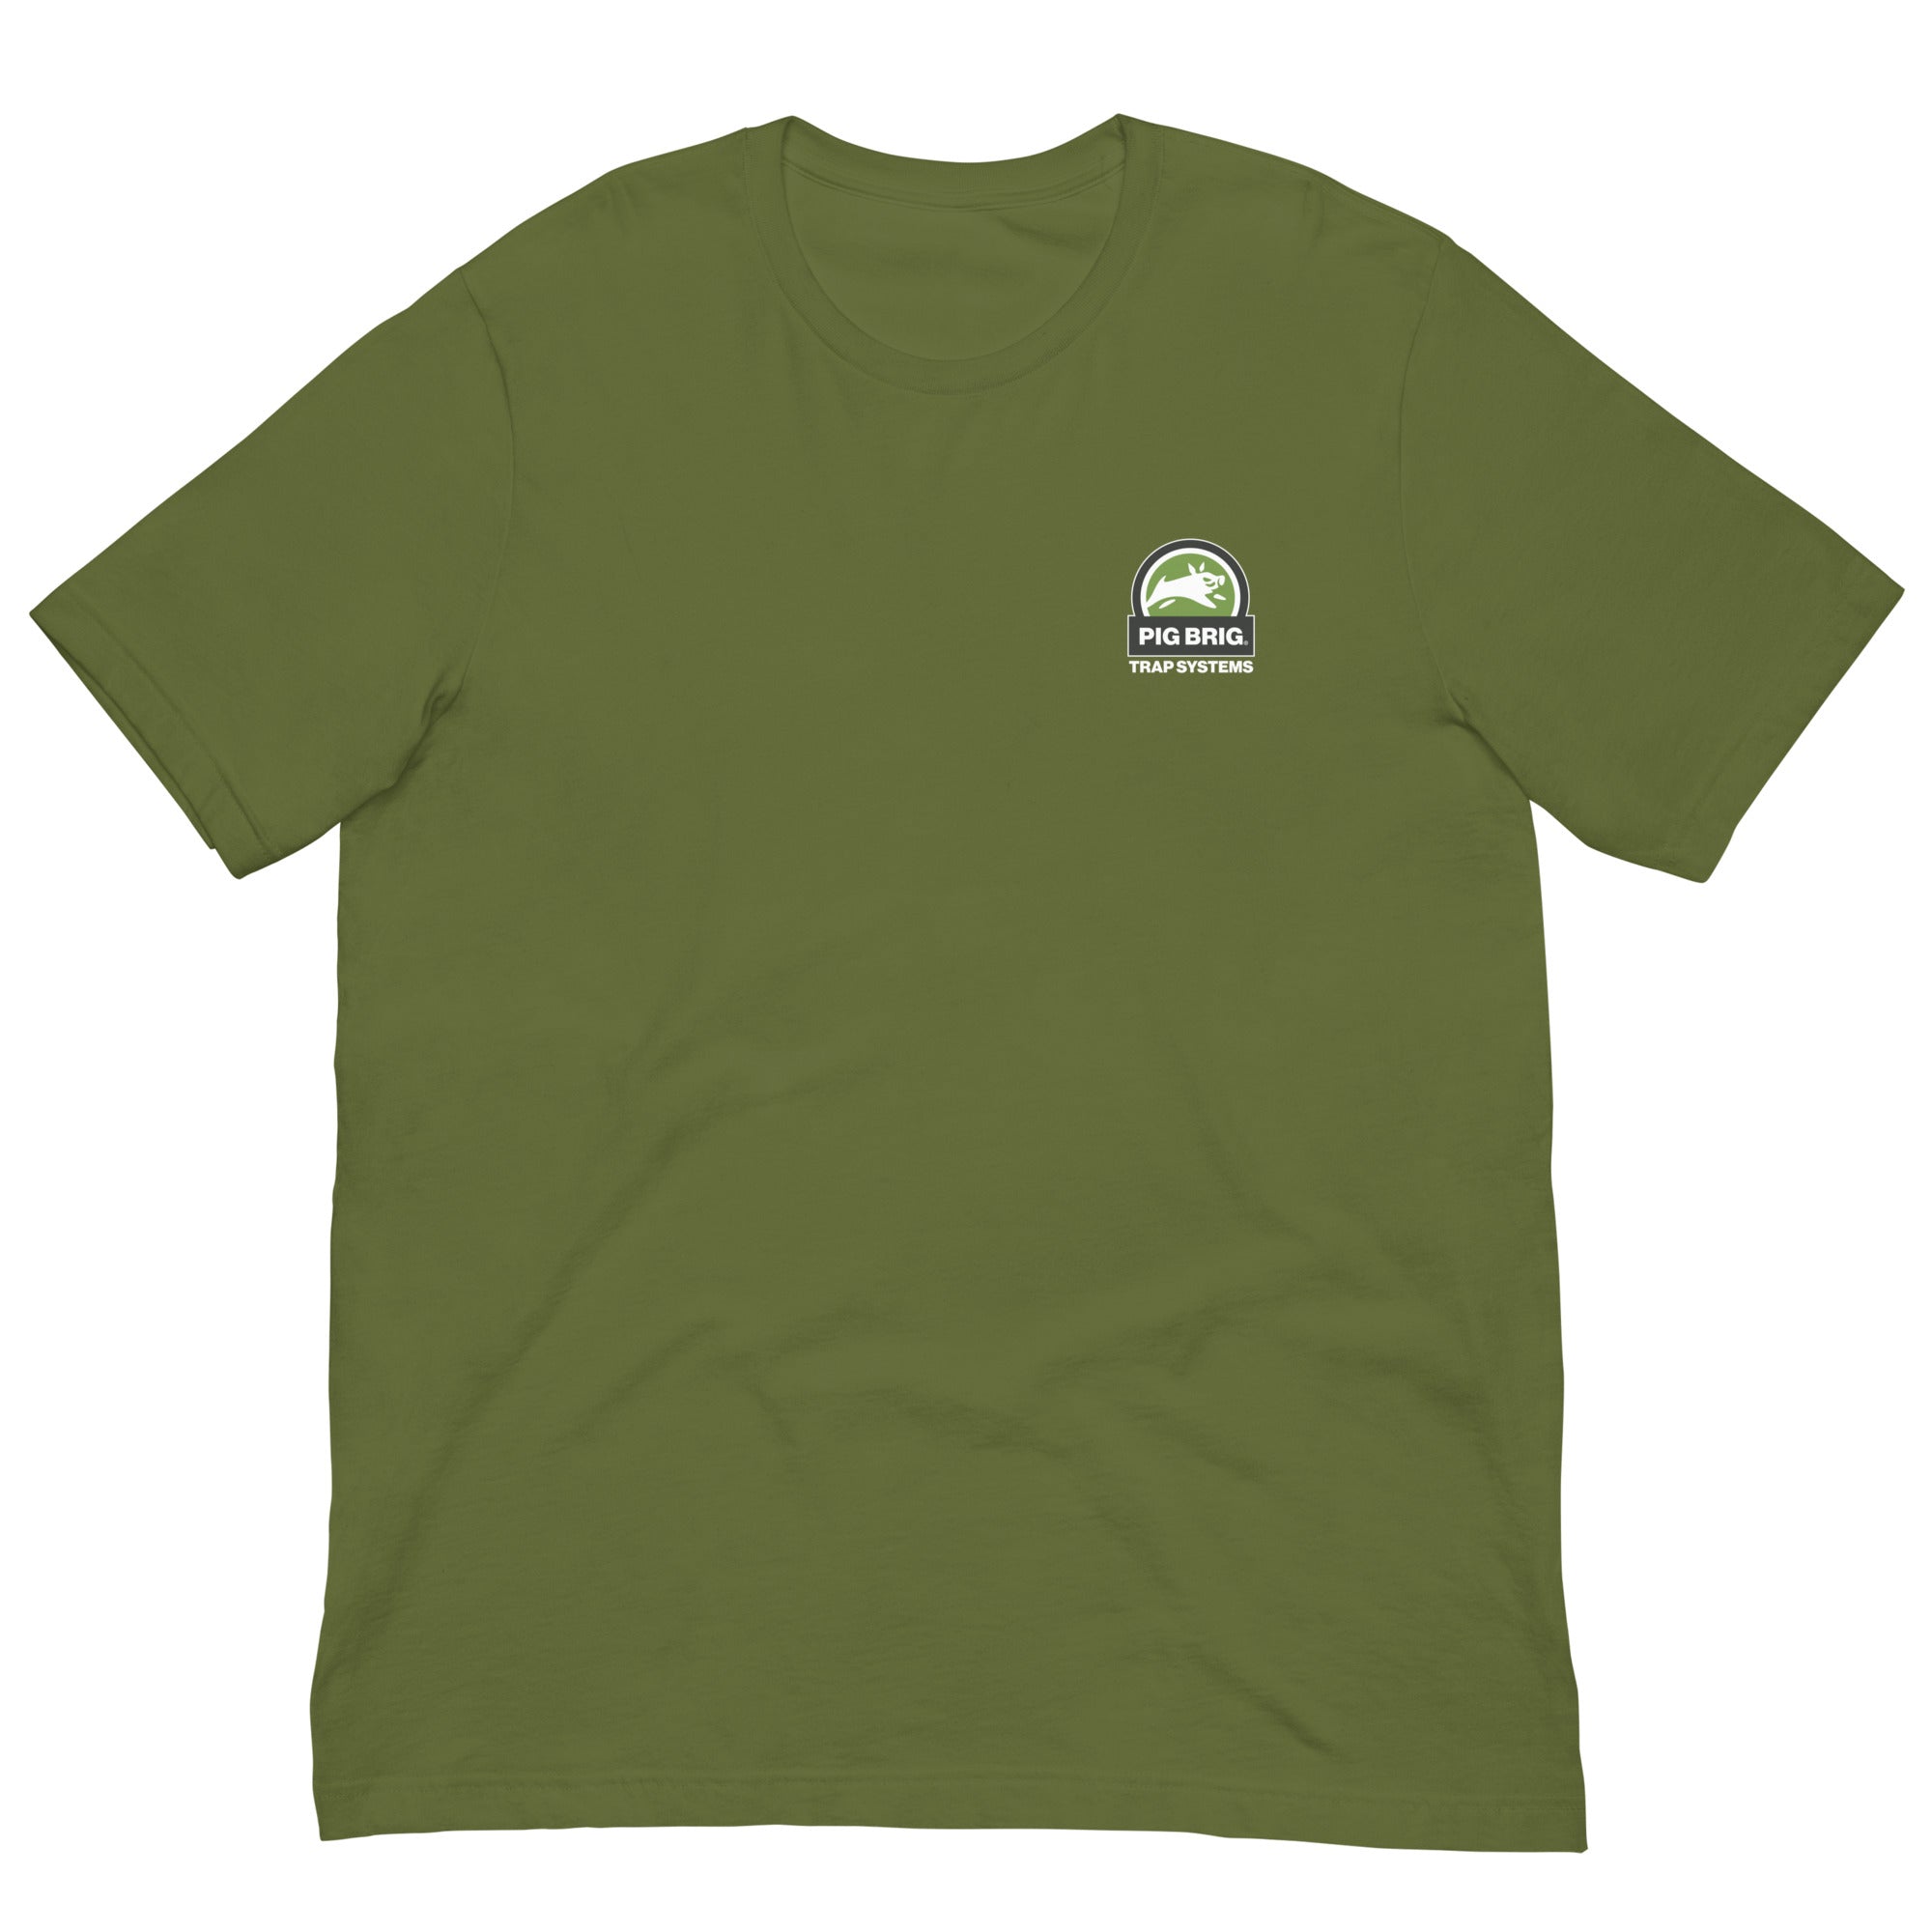 Sounder Pounder - Double Sided T-Shirt